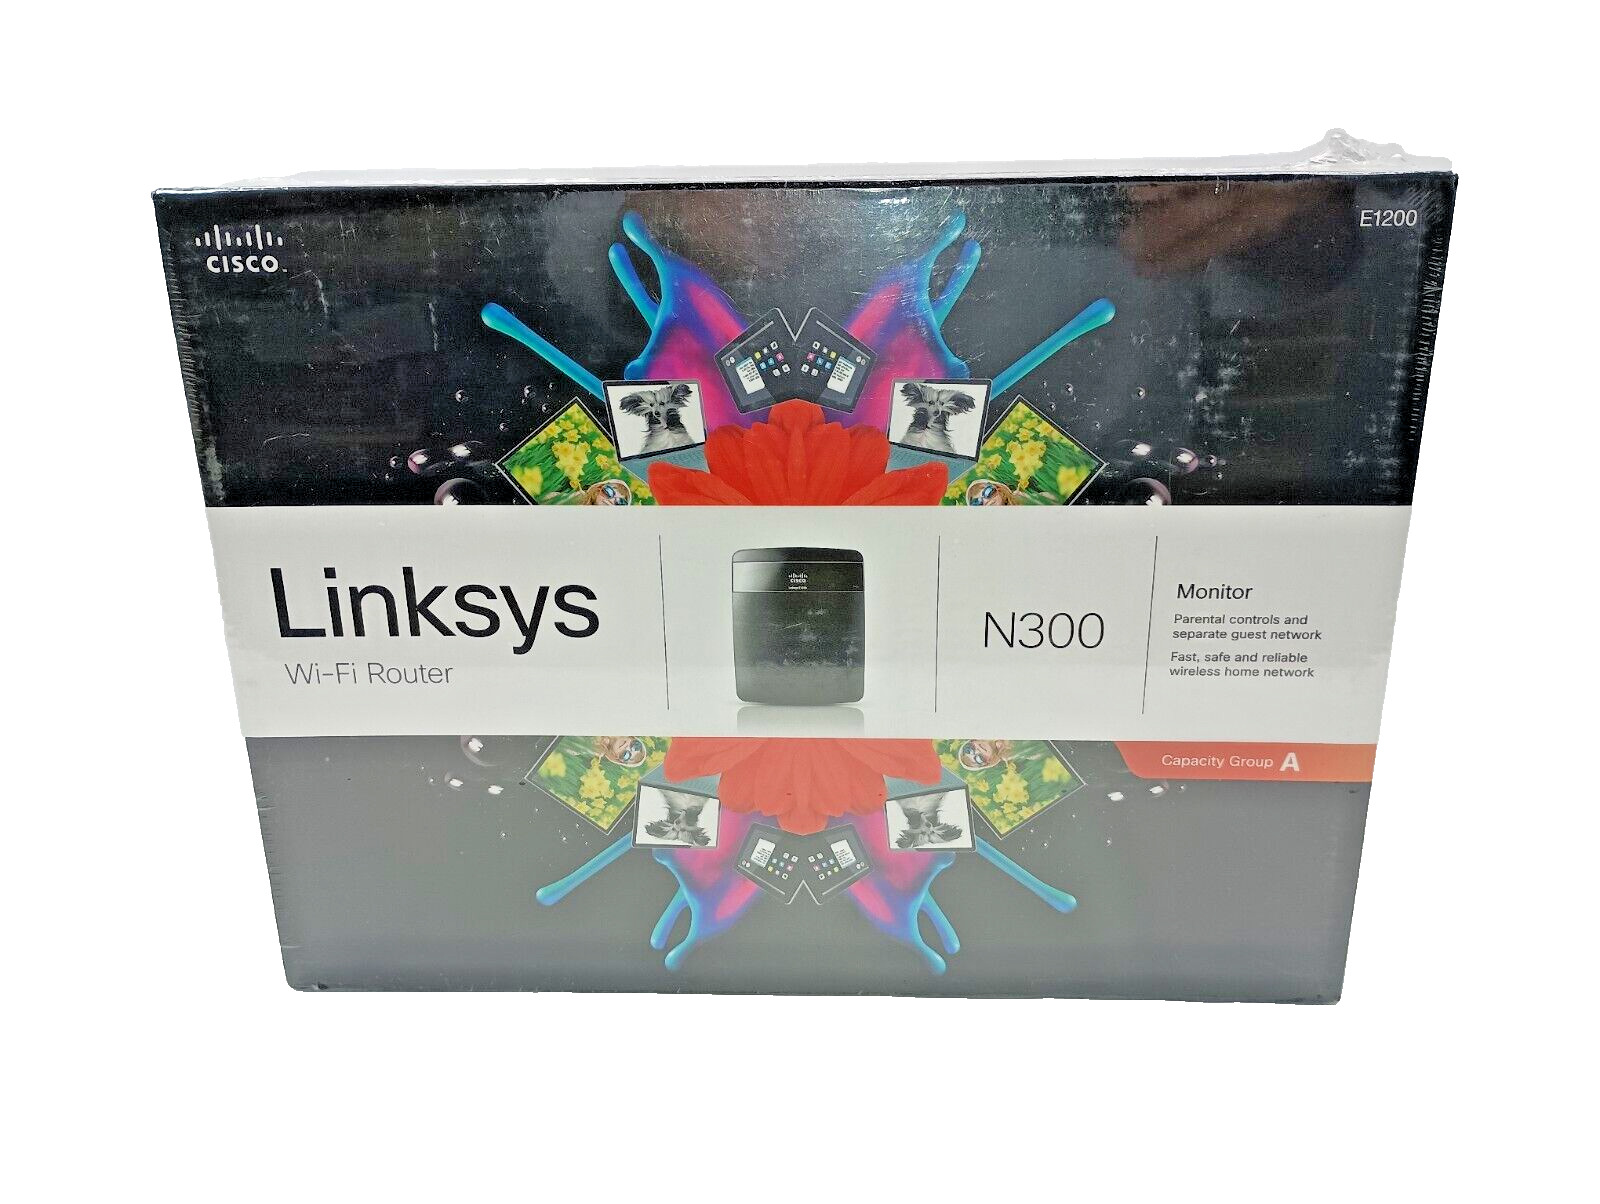 NEW Cisco Linksys E1200 N300 Mbps 4-Port 10/100 Wireless Router new sealed box